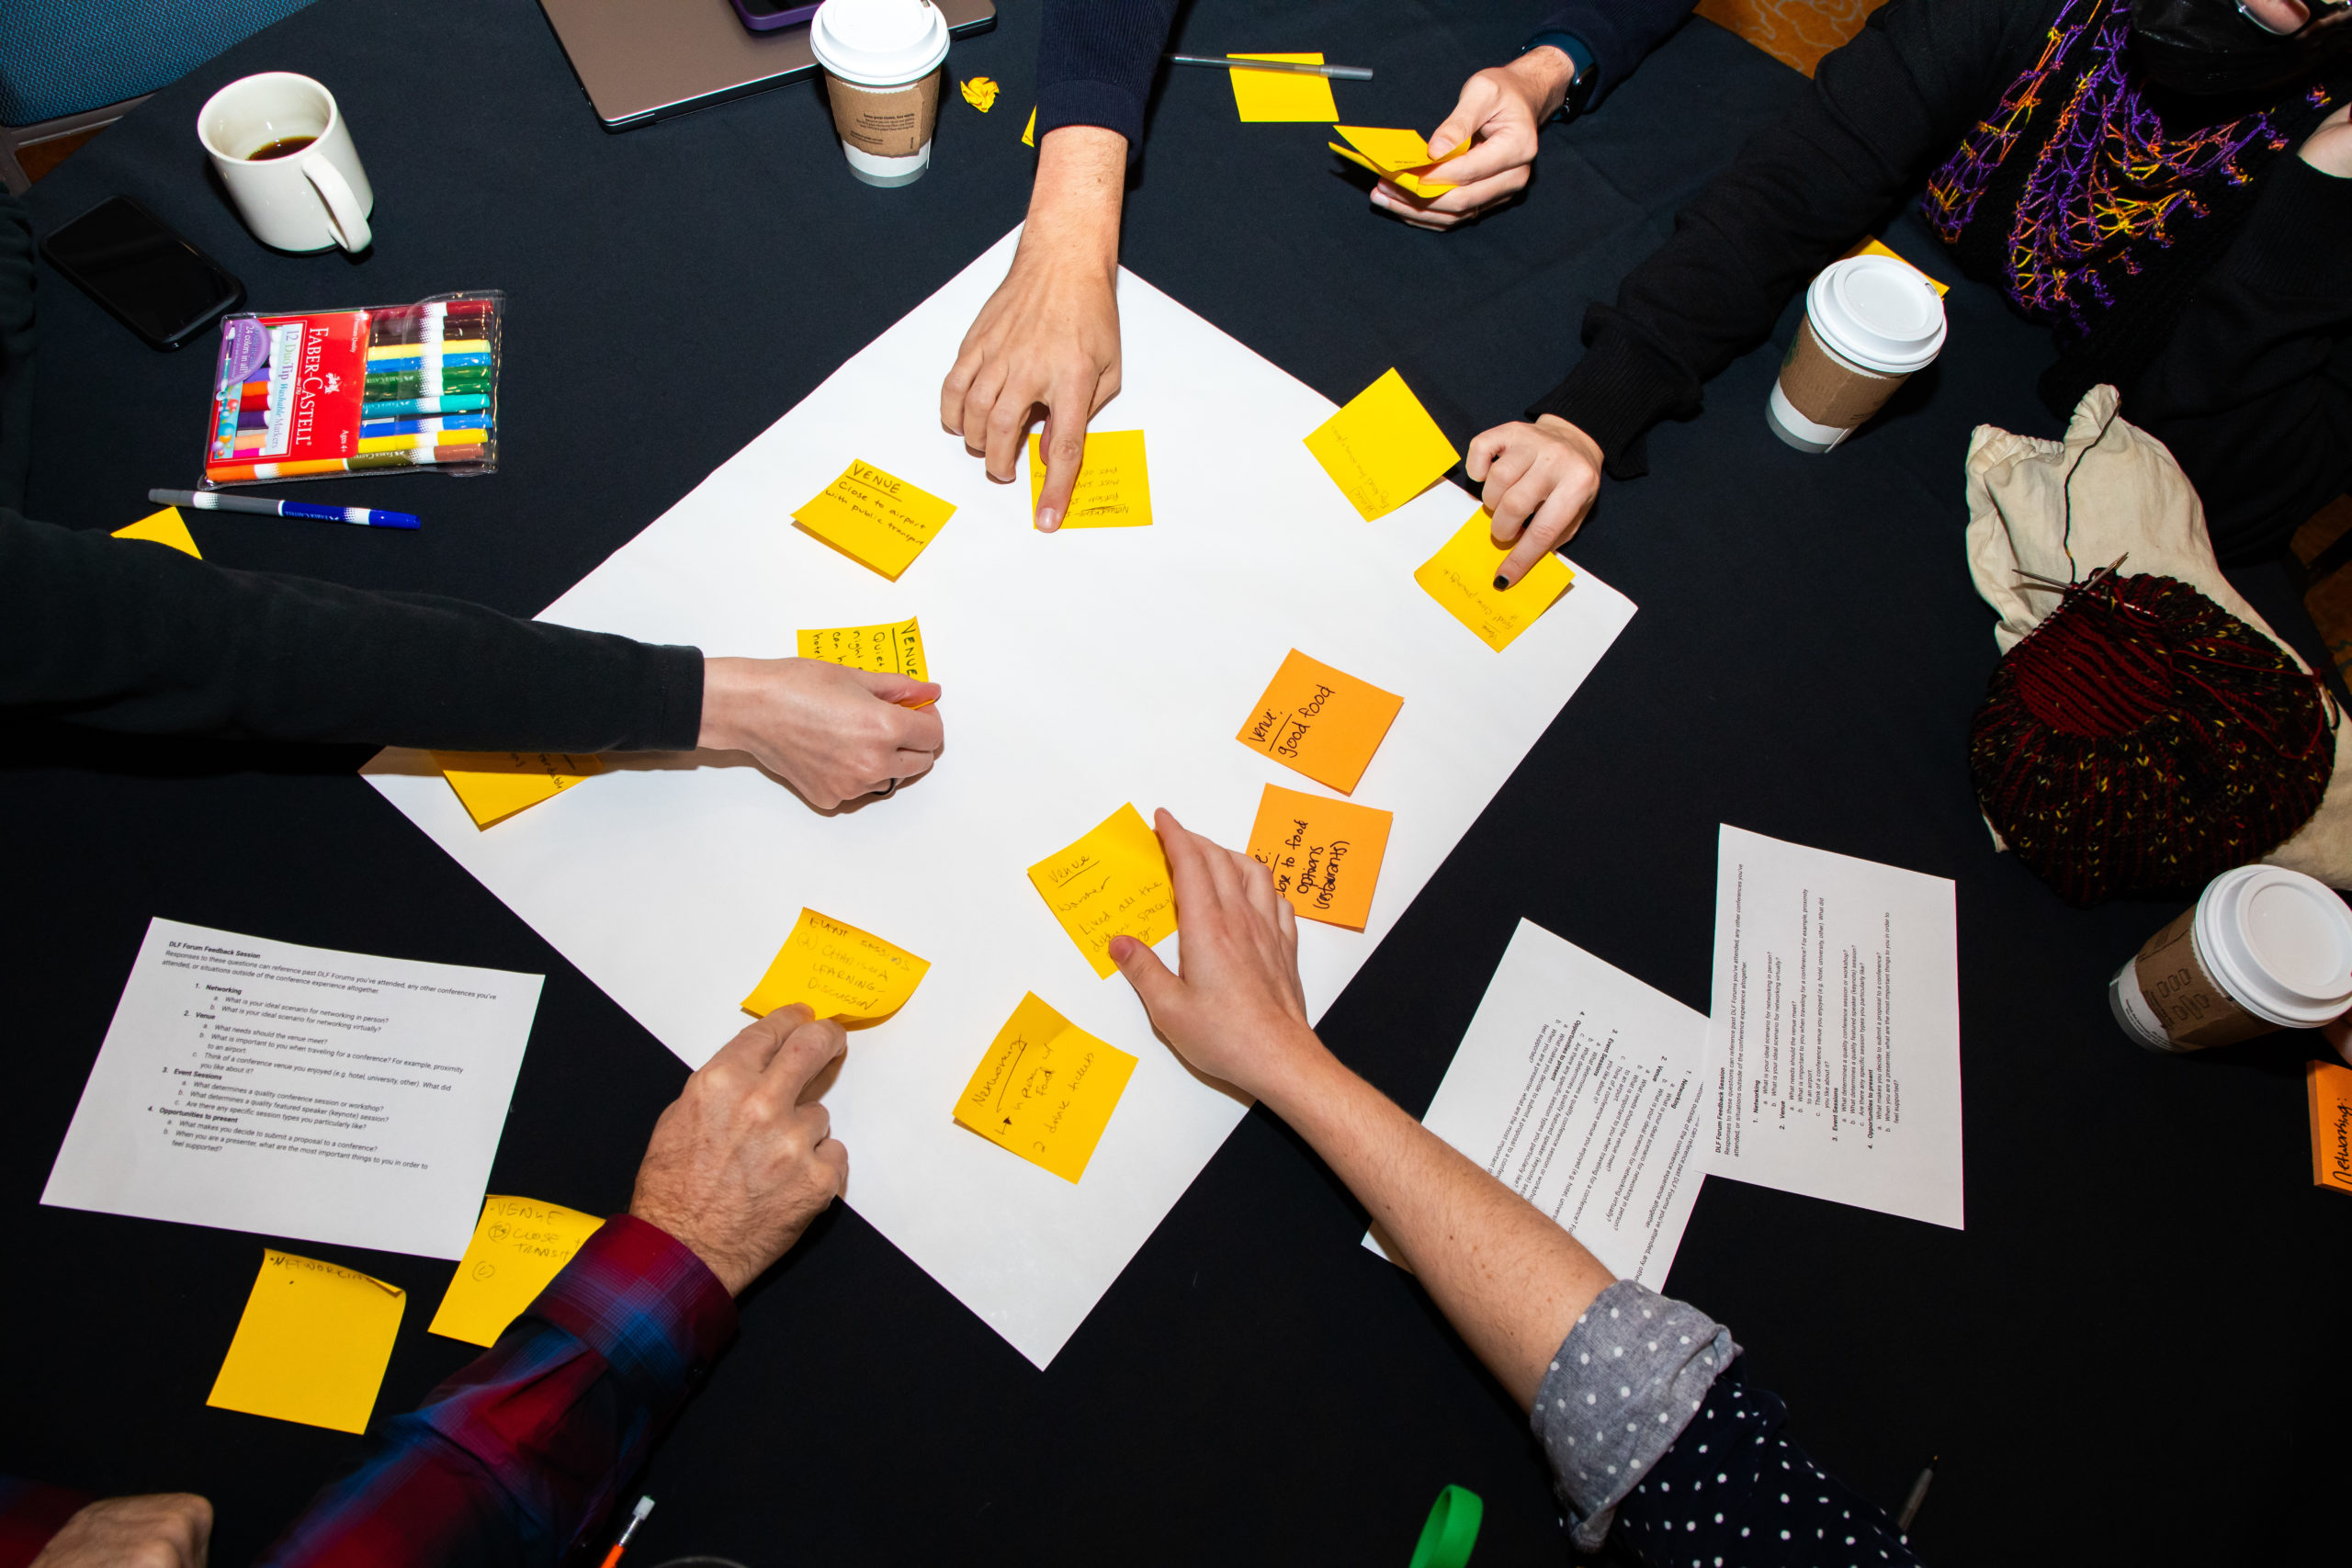 Birds eye view of a table with sticky notes, showing people reaching for things.